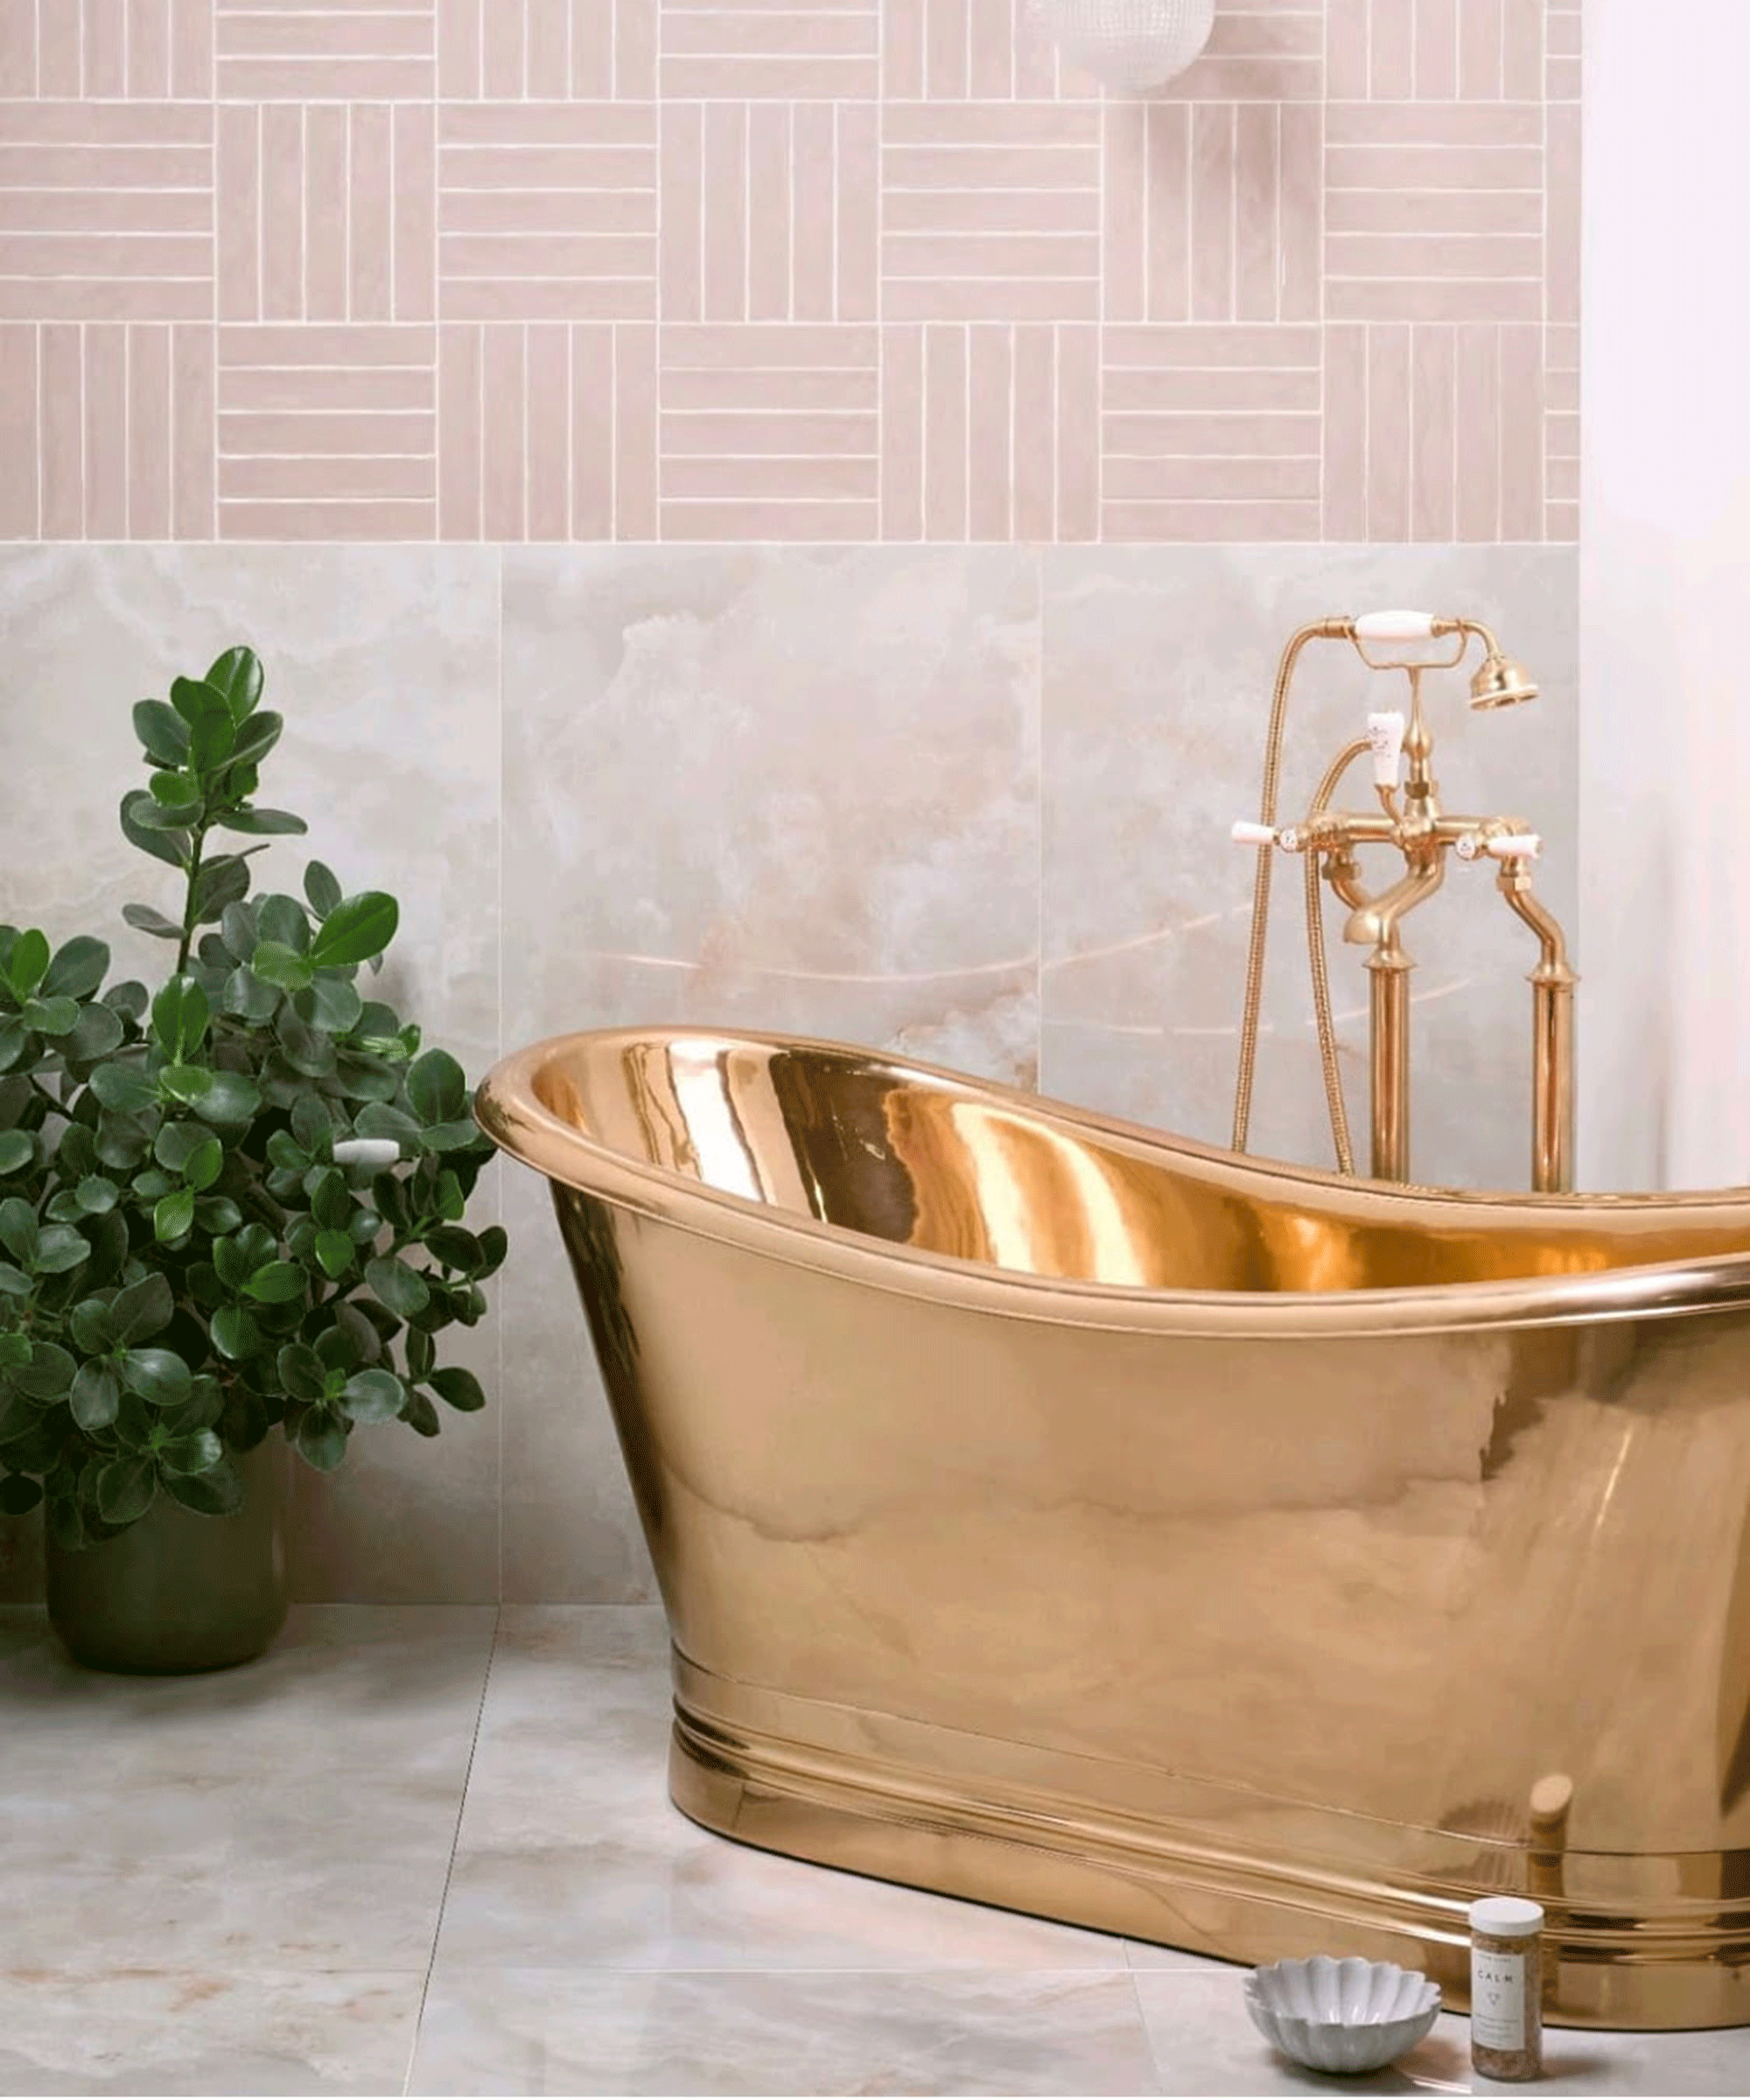 A copper boat bath in bathroom with pink tiles